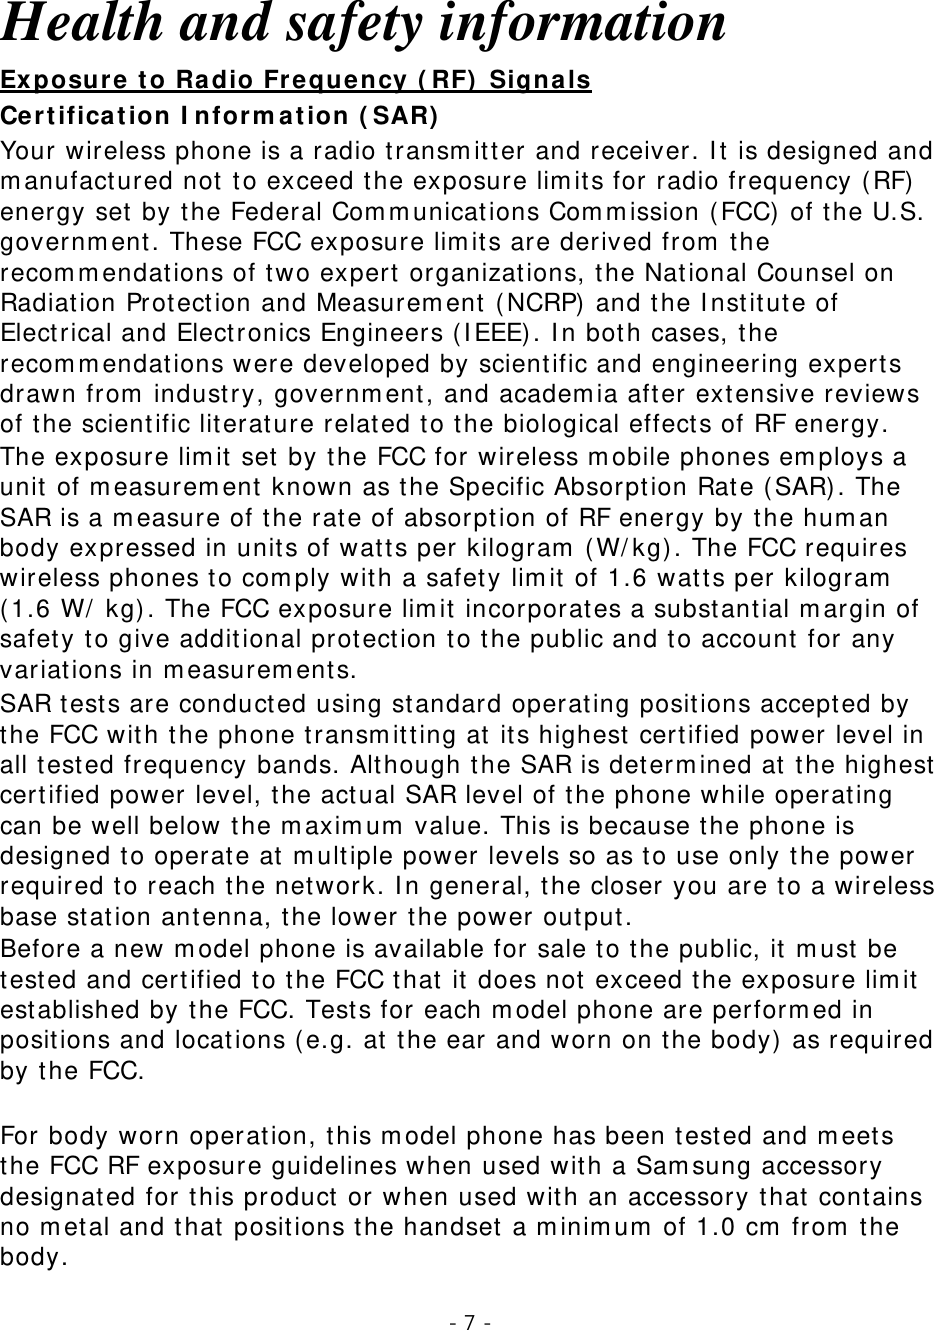 - 7 -   Health and safety information Certification Information (SAR) Exposure to Radio Frequency (RF) Signals Your wireless phone is a radio transmitter and receiver. It is designed and manufactured not to exceed the exposure limits for radio frequency (RF) energy set by the Federal Communications Commission (FCC) of the U.S. government. These FCC exposure limits are derived from the recommendations of two expert organizations, the National Counsel on Radiation Protection and Measurement (NCRP) and the Institute of Electrical and Electronics Engineers (IEEE). In both cases, the recommendations were developed by scientific and engineering experts drawn from industry, government, and academia after extensive reviews of the scientific literature related to the biological effects of RF energy. The exposure limit set by the FCC for wireless mobile phones employs a unit of measurement known as the Specific Absorption Rate (SAR). The SAR is a measure of the rate of absorption of RF energy by the human body expressed in units of watts per kilogram (W/kg). The FCC requires wireless phones to comply with a safety limit of 1.6 watts per kilogram (1.6 W/ kg). The FCC exposure limit incorporates a substantial margin of safety to give additional protection to the public and to account for any variations in measurements. SAR tests are conducted using standard operating positions accepted by the FCC with the phone transmitting at its highest certified power level in all tested frequency bands. Although the SAR is determined at the highest certified power level, the actual SAR level of the phone while operating can be well below the maximum value. This is because the phone is designed to operate at multiple power levels so as to use only the power required to reach the network. In general, the closer you are to a wireless base station antenna, the lower the power output. Before a new model phone is available for sale to the public, it must be tested and certified to the FCC that it does not exceed the exposure limit established by the FCC. Tests for each model phone are performed in positions and locations (e.g. at the ear and worn on the body) as required by the FCC.    For body worn operation, this model phone has been tested and meets the FCC RF exposure guidelines when used with a Samsung accessory designated for this product or when used with an accessory that contains no metal and that positions the handset a minimum of 1.0 cm from the body.  